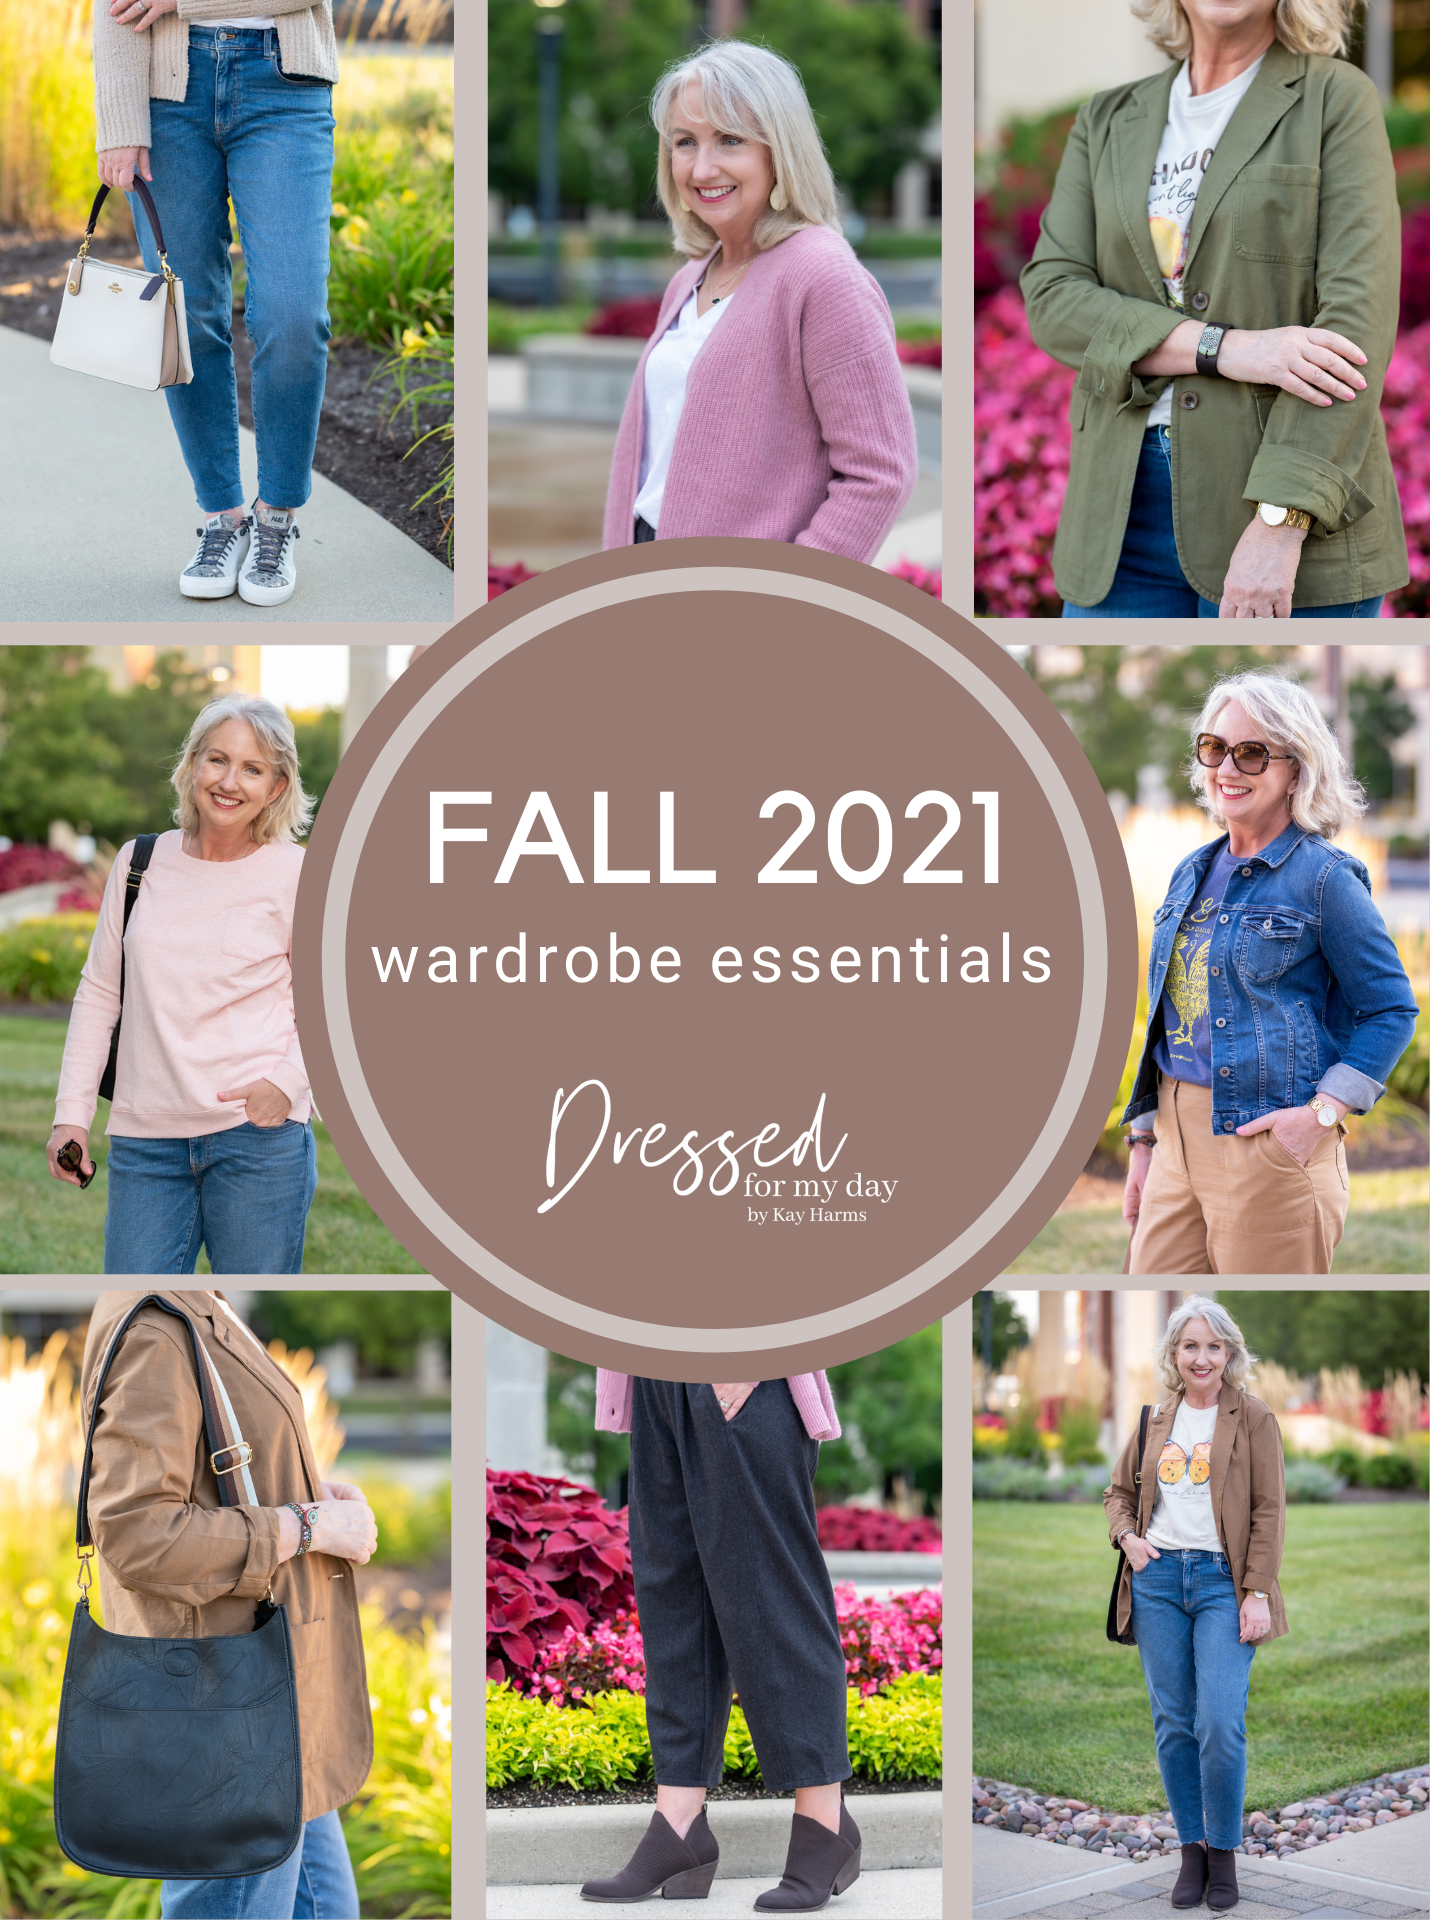 3 EARLY FALL TALBOTS OUTFITS I'M ABSOLUTELY LOVING - Beautifully